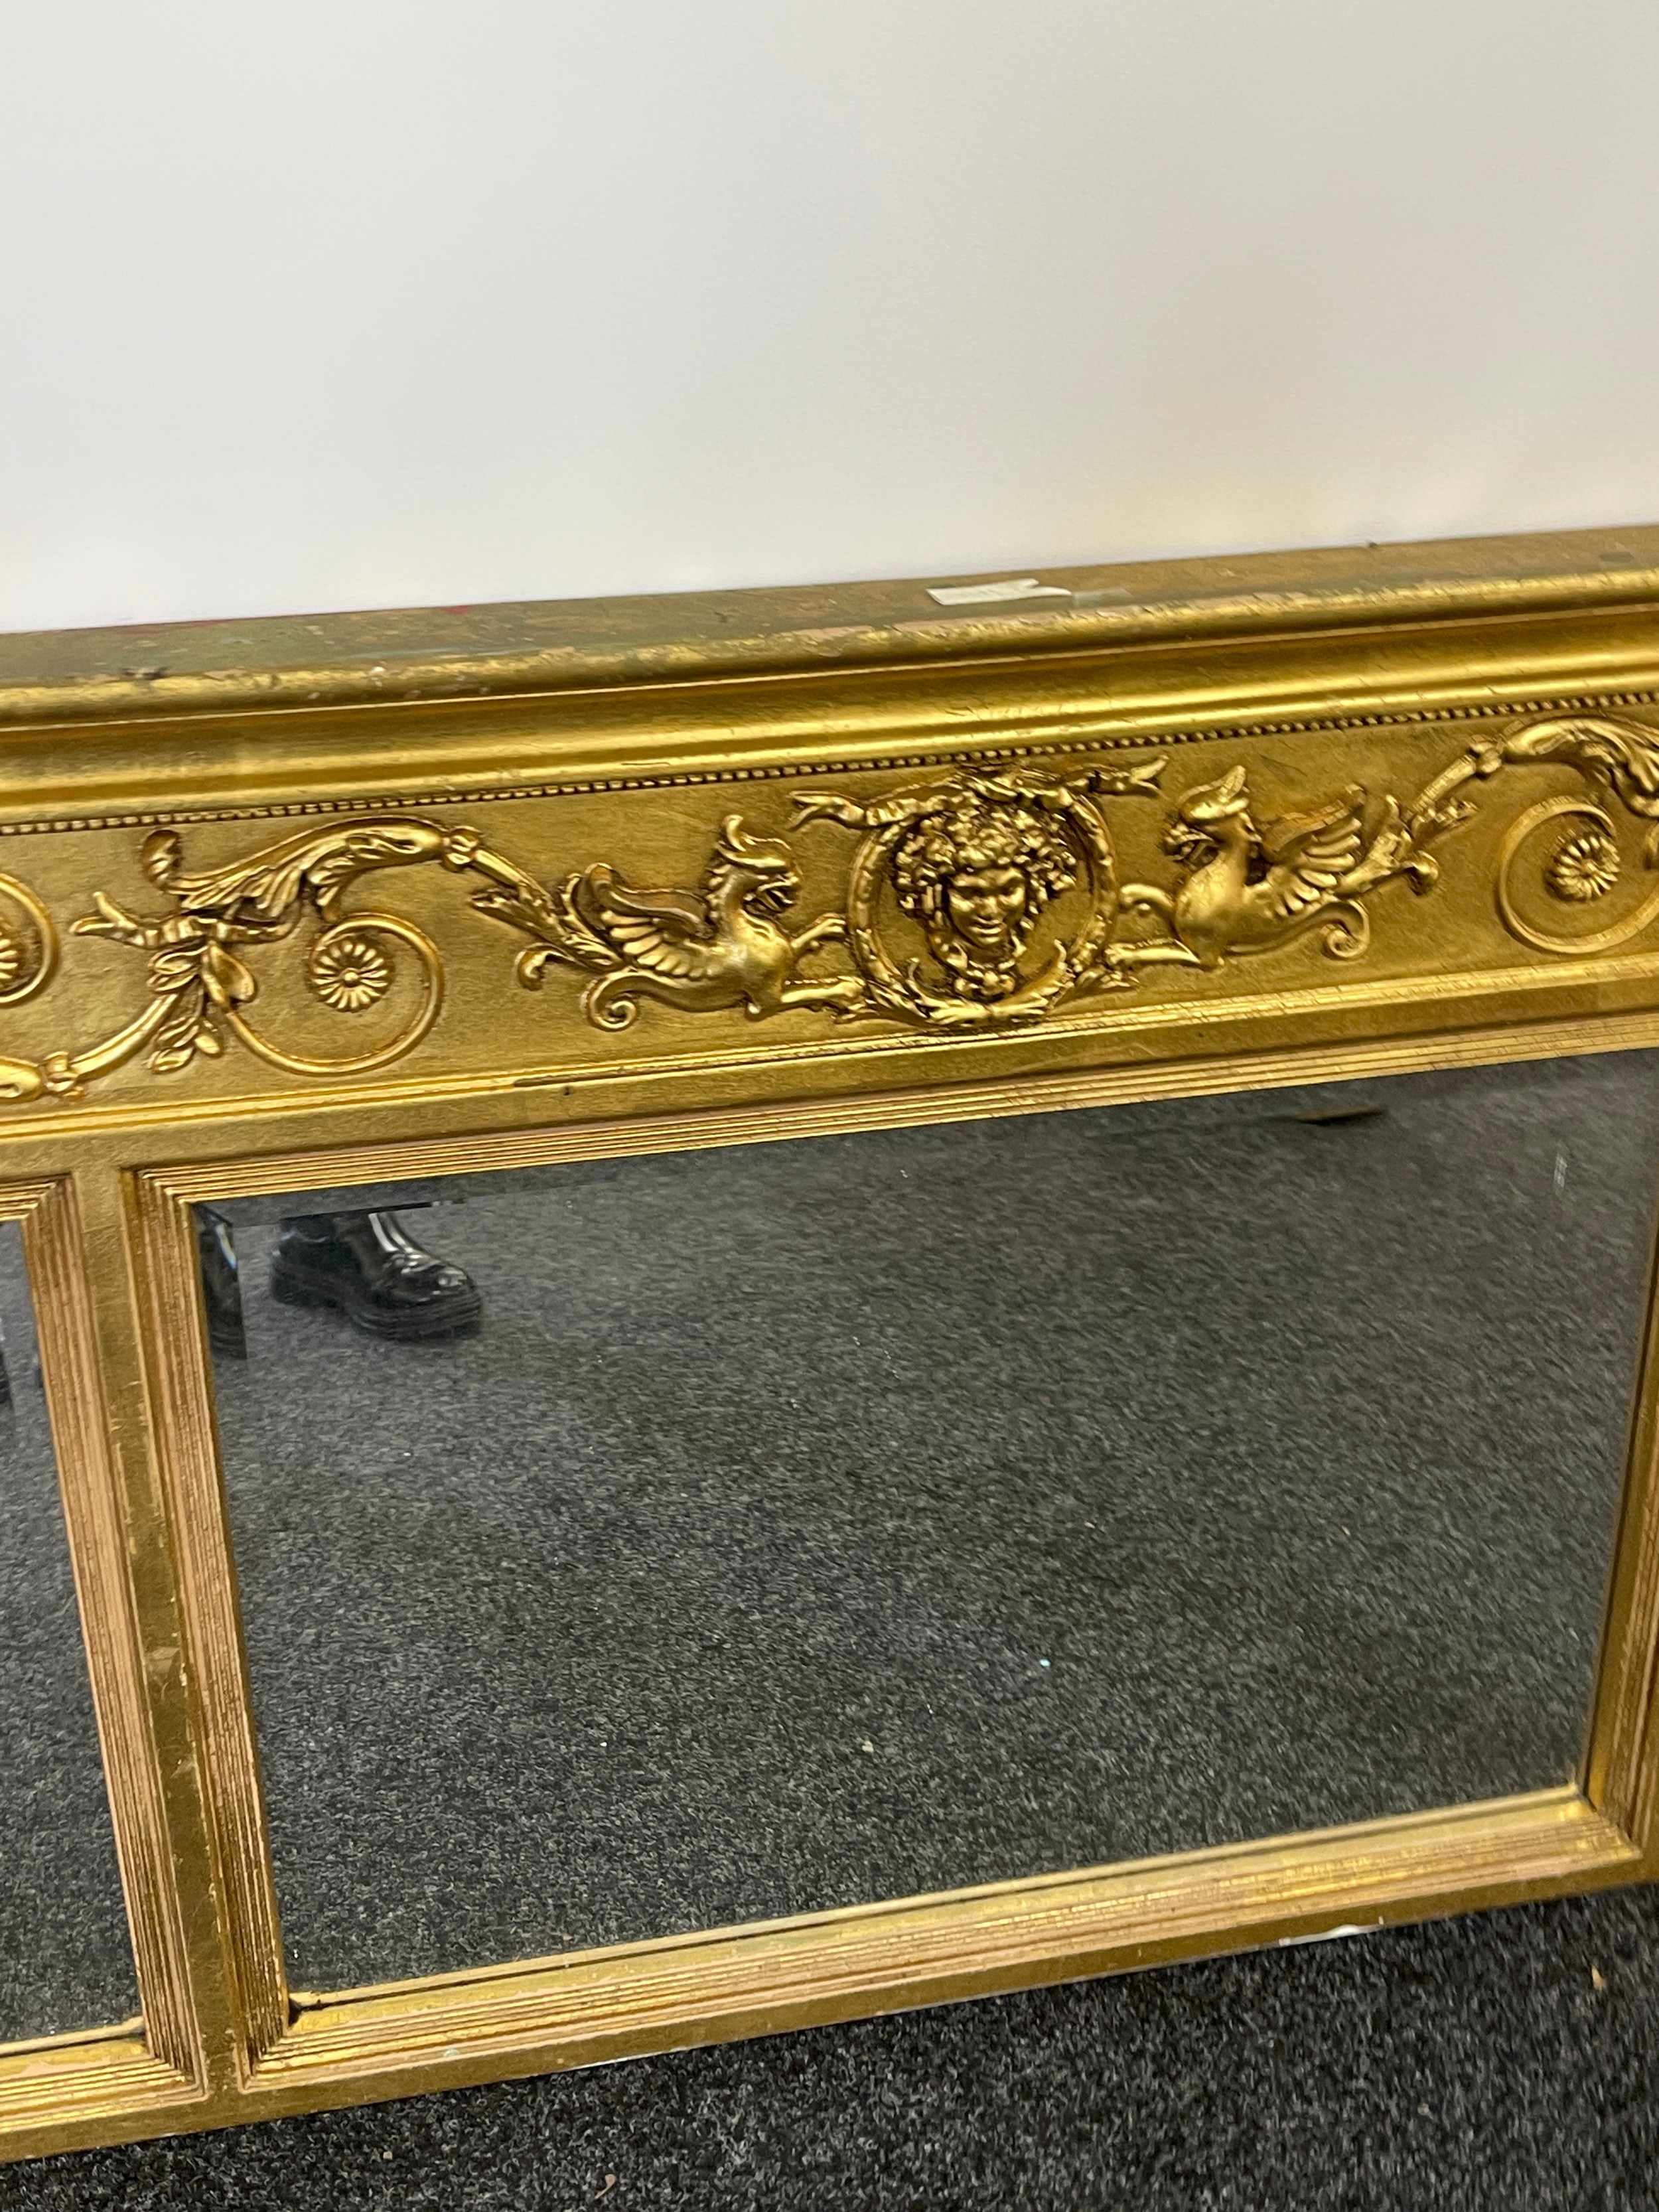 Gilt framed ornate mantle mirror, Height 30 inches, Width 55 inches - Image 3 of 4